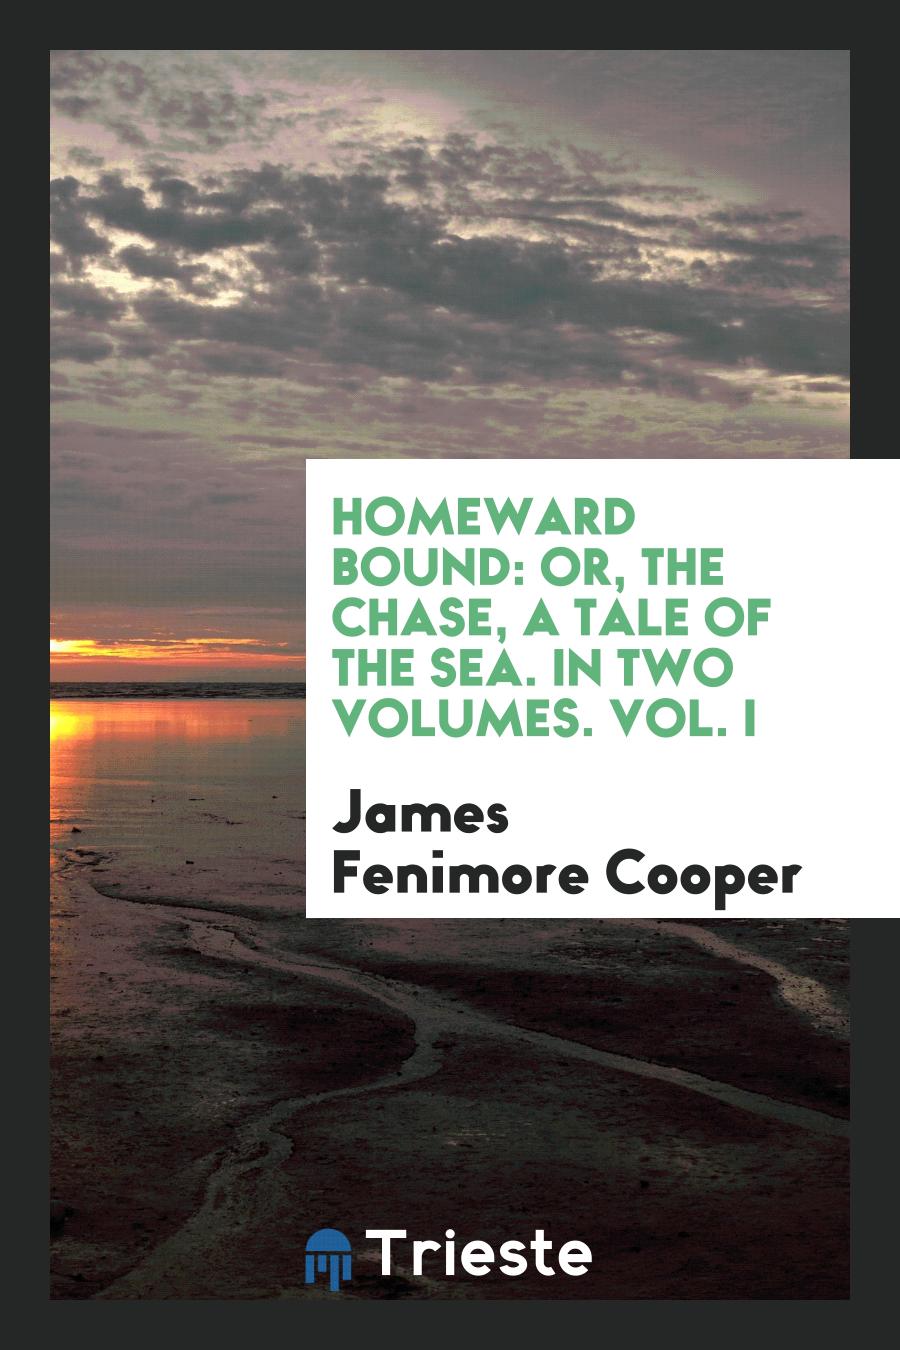 Homeward Bound: Or, the Chase, a Tale of the Sea. In Two Volumes. Vol. I